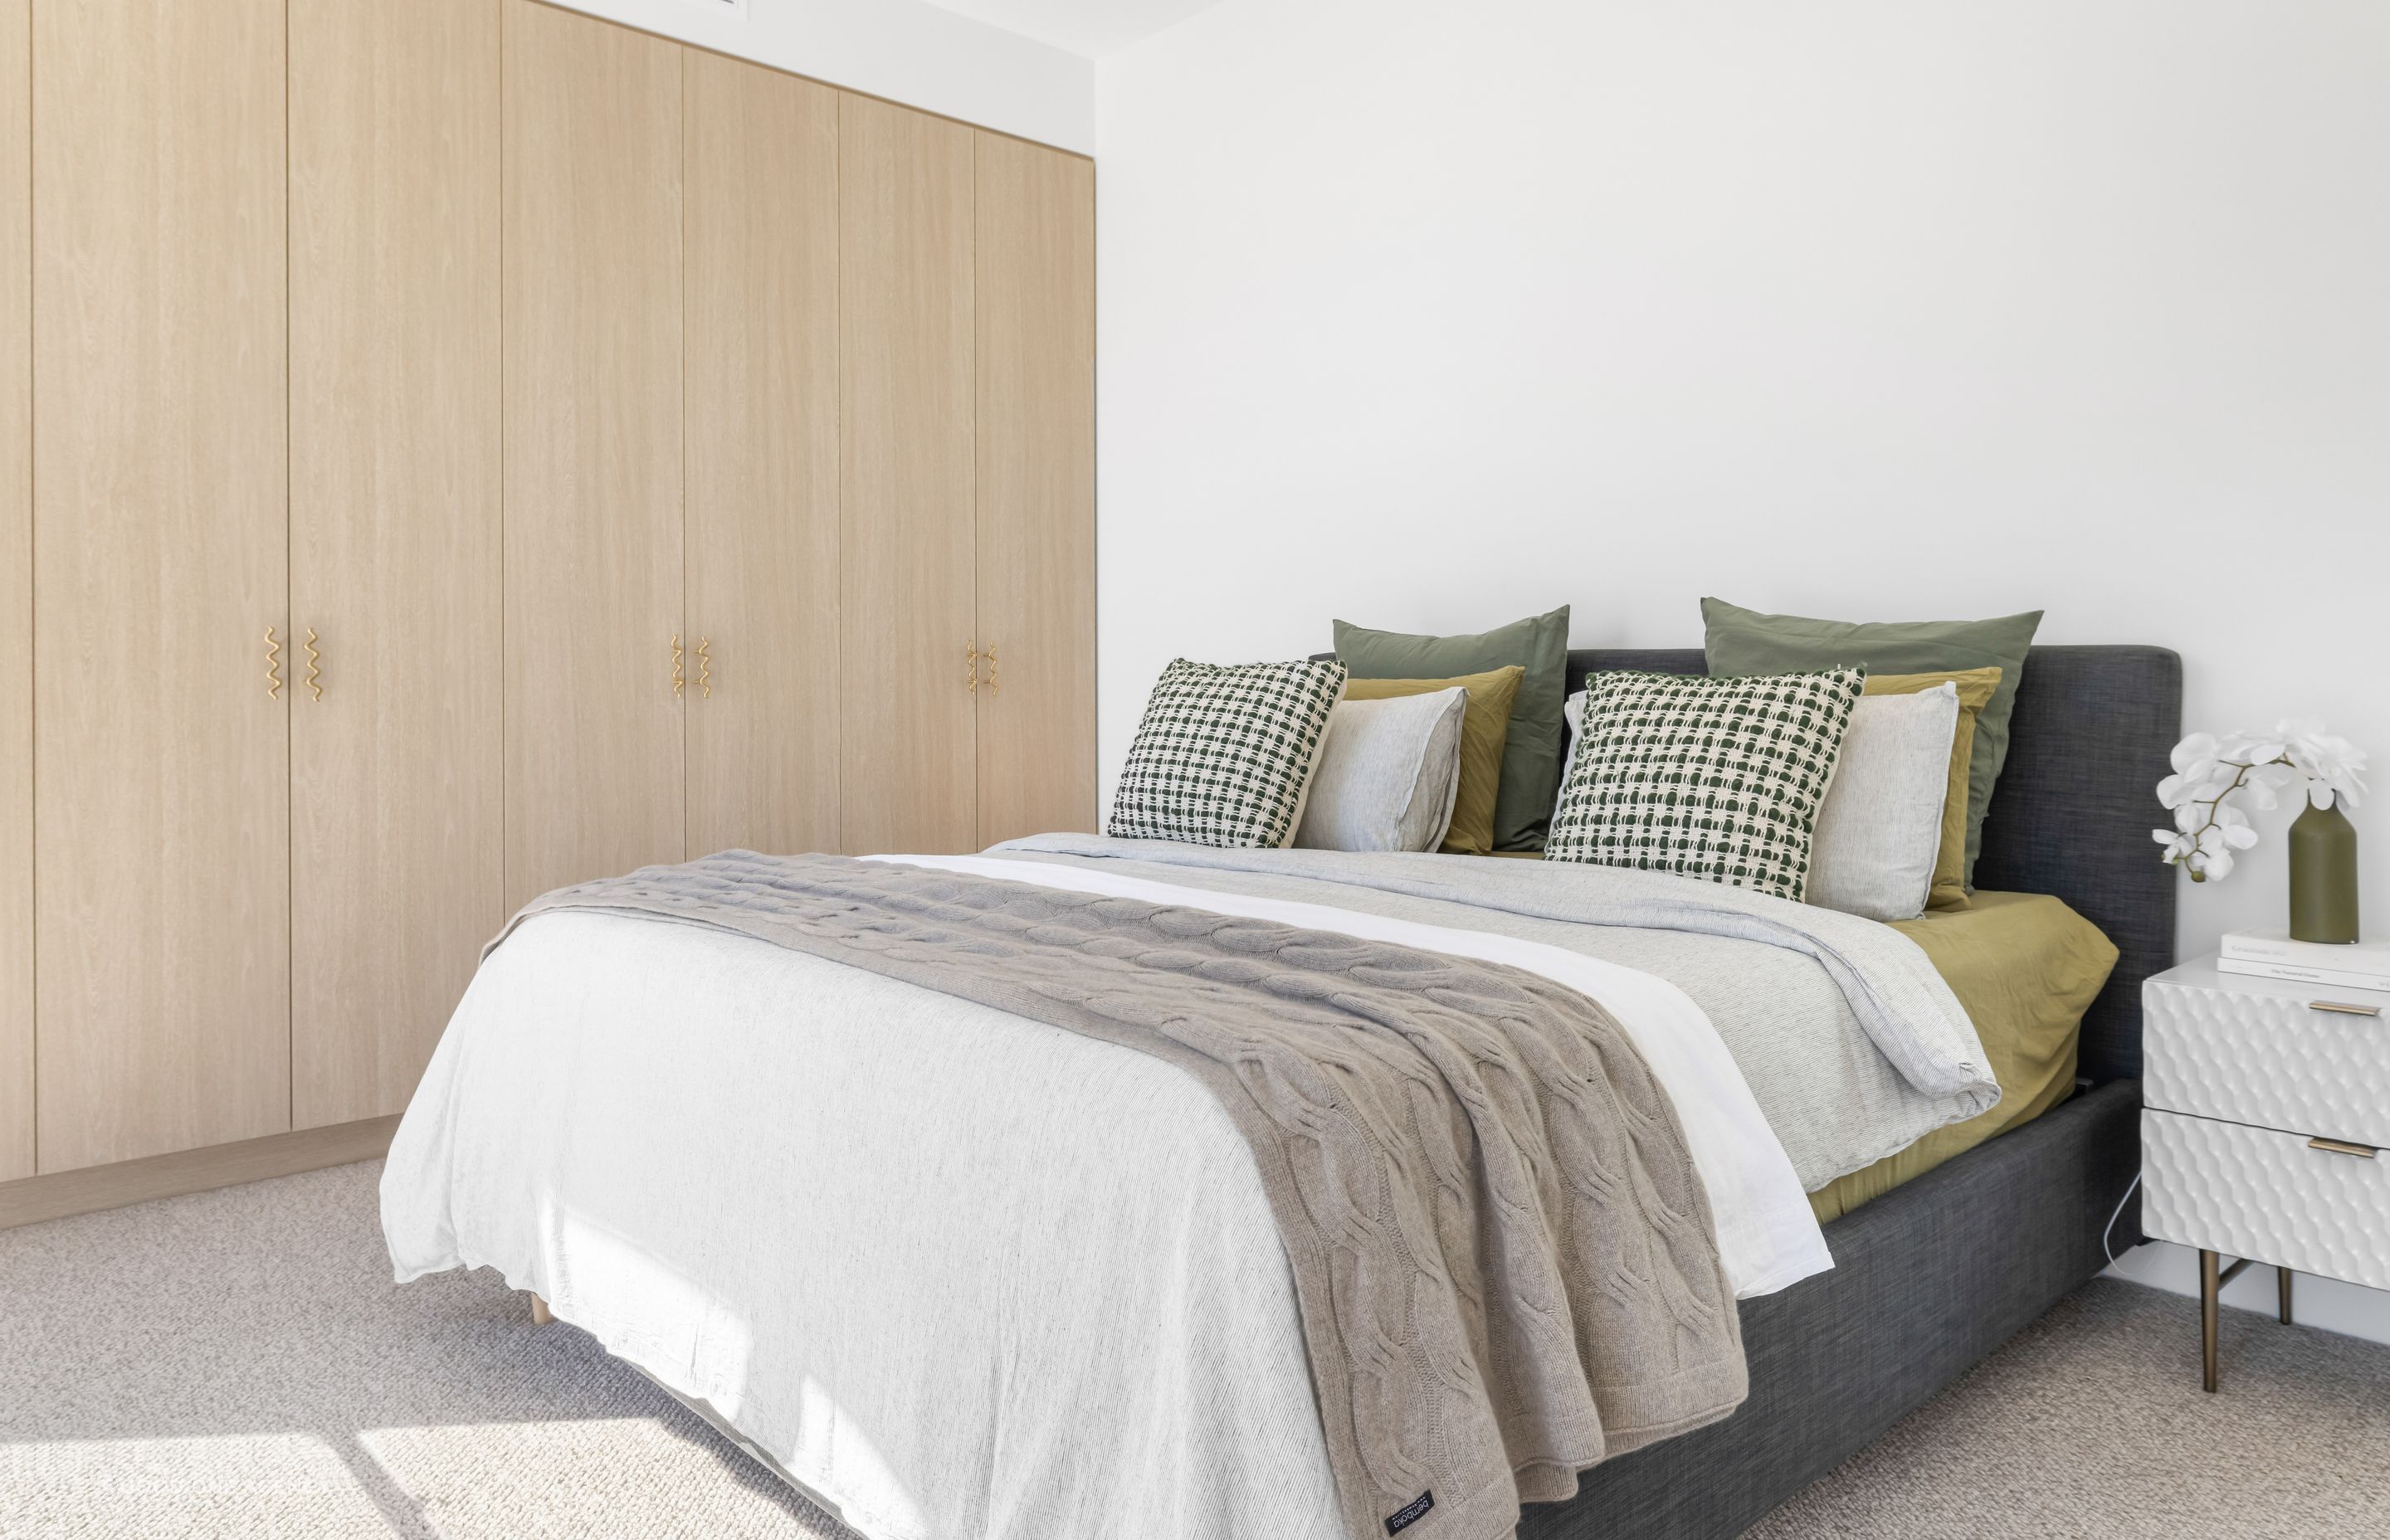 The master bedroom features a soft material palette and the playful squiggle handles that are found throughout the home.